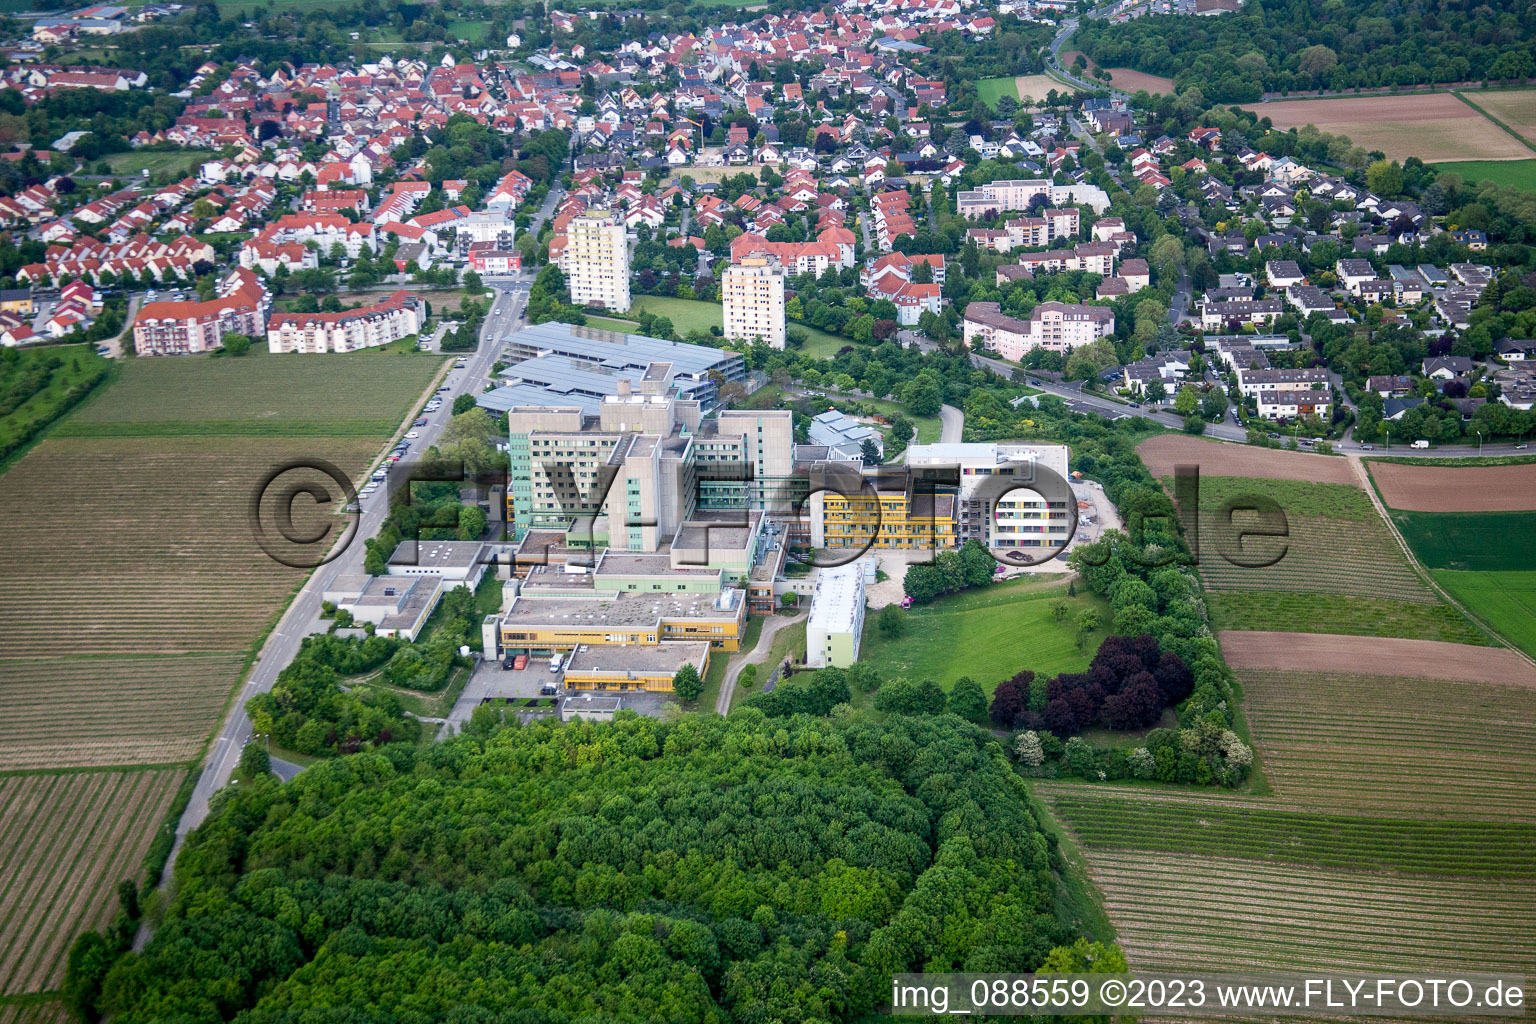 Aerial view of Clinic in the district Herrnsheim in Worms in the state Rhineland-Palatinate, Germany